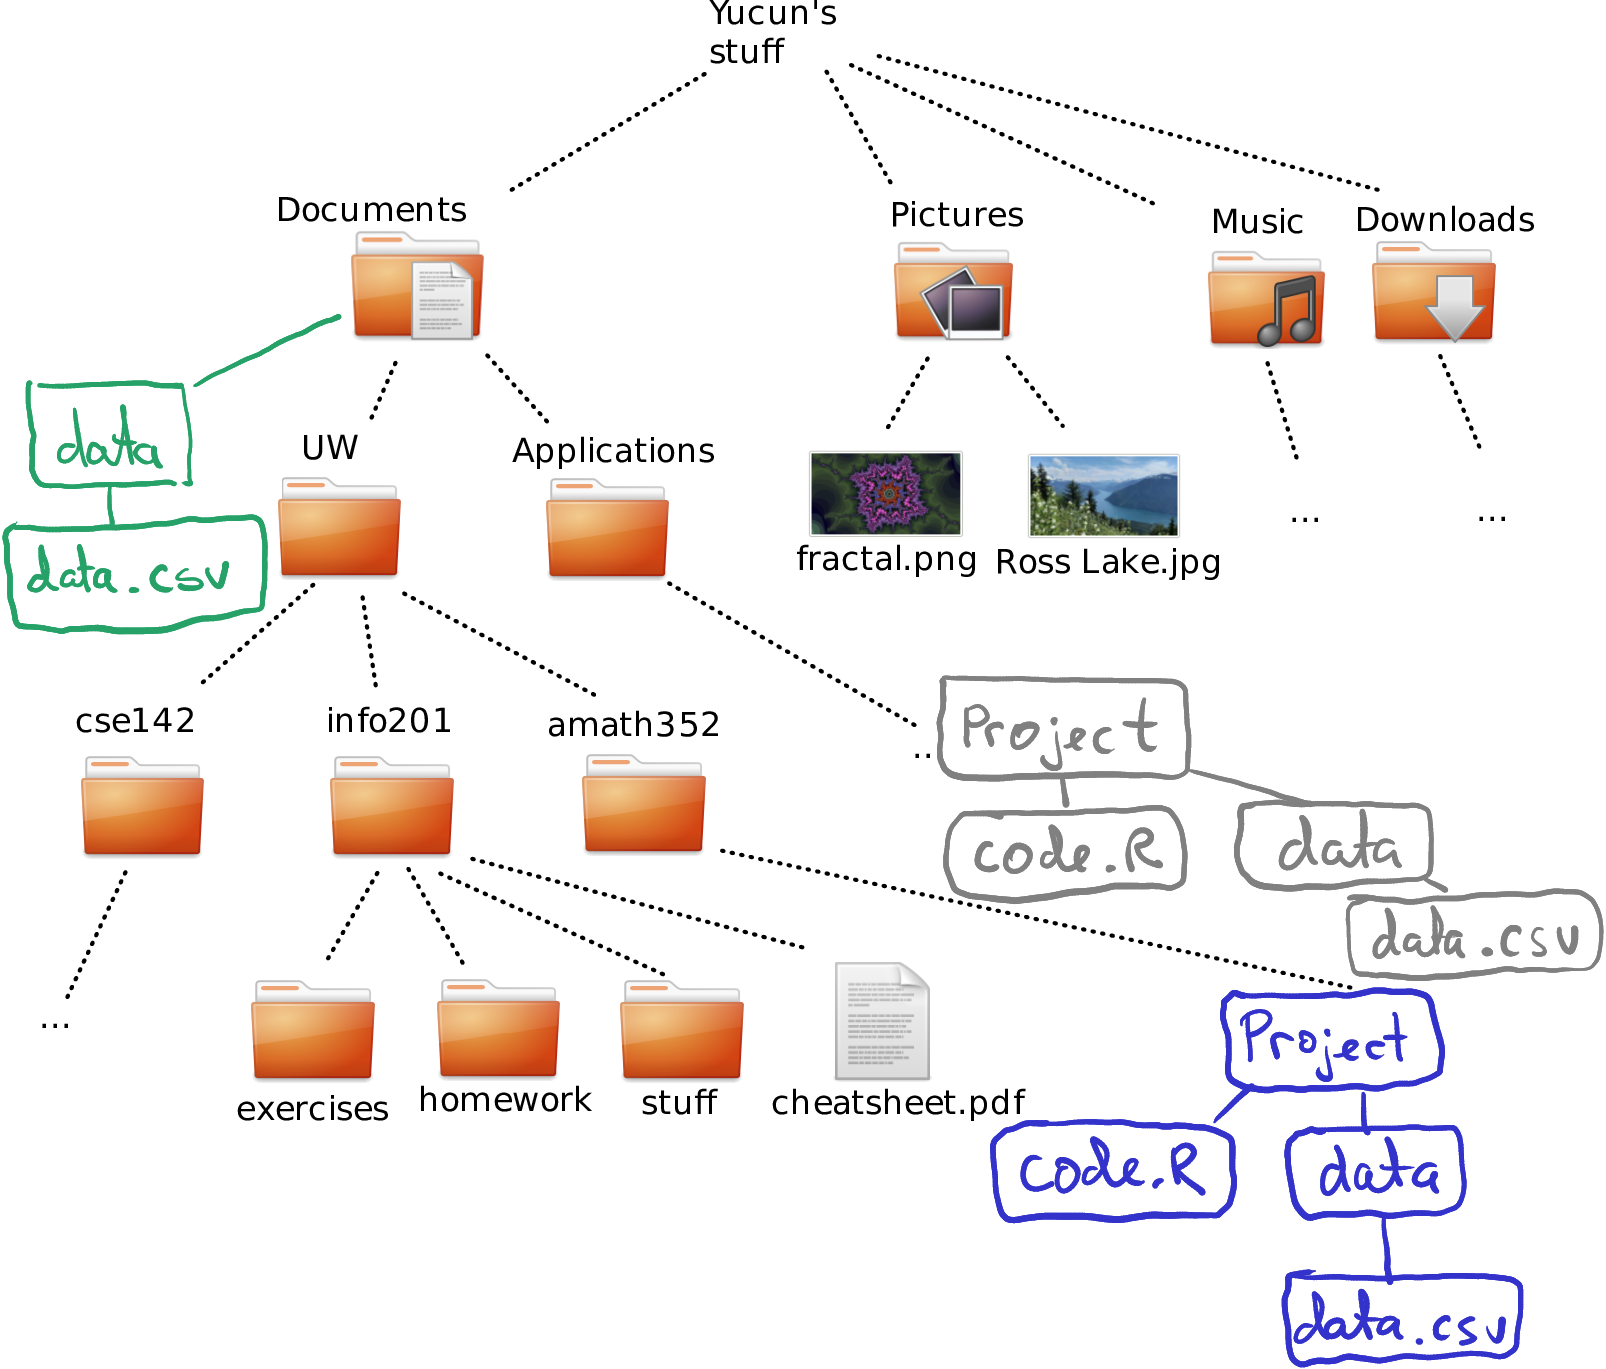 projects and data in different places in Yucun’s file system tree